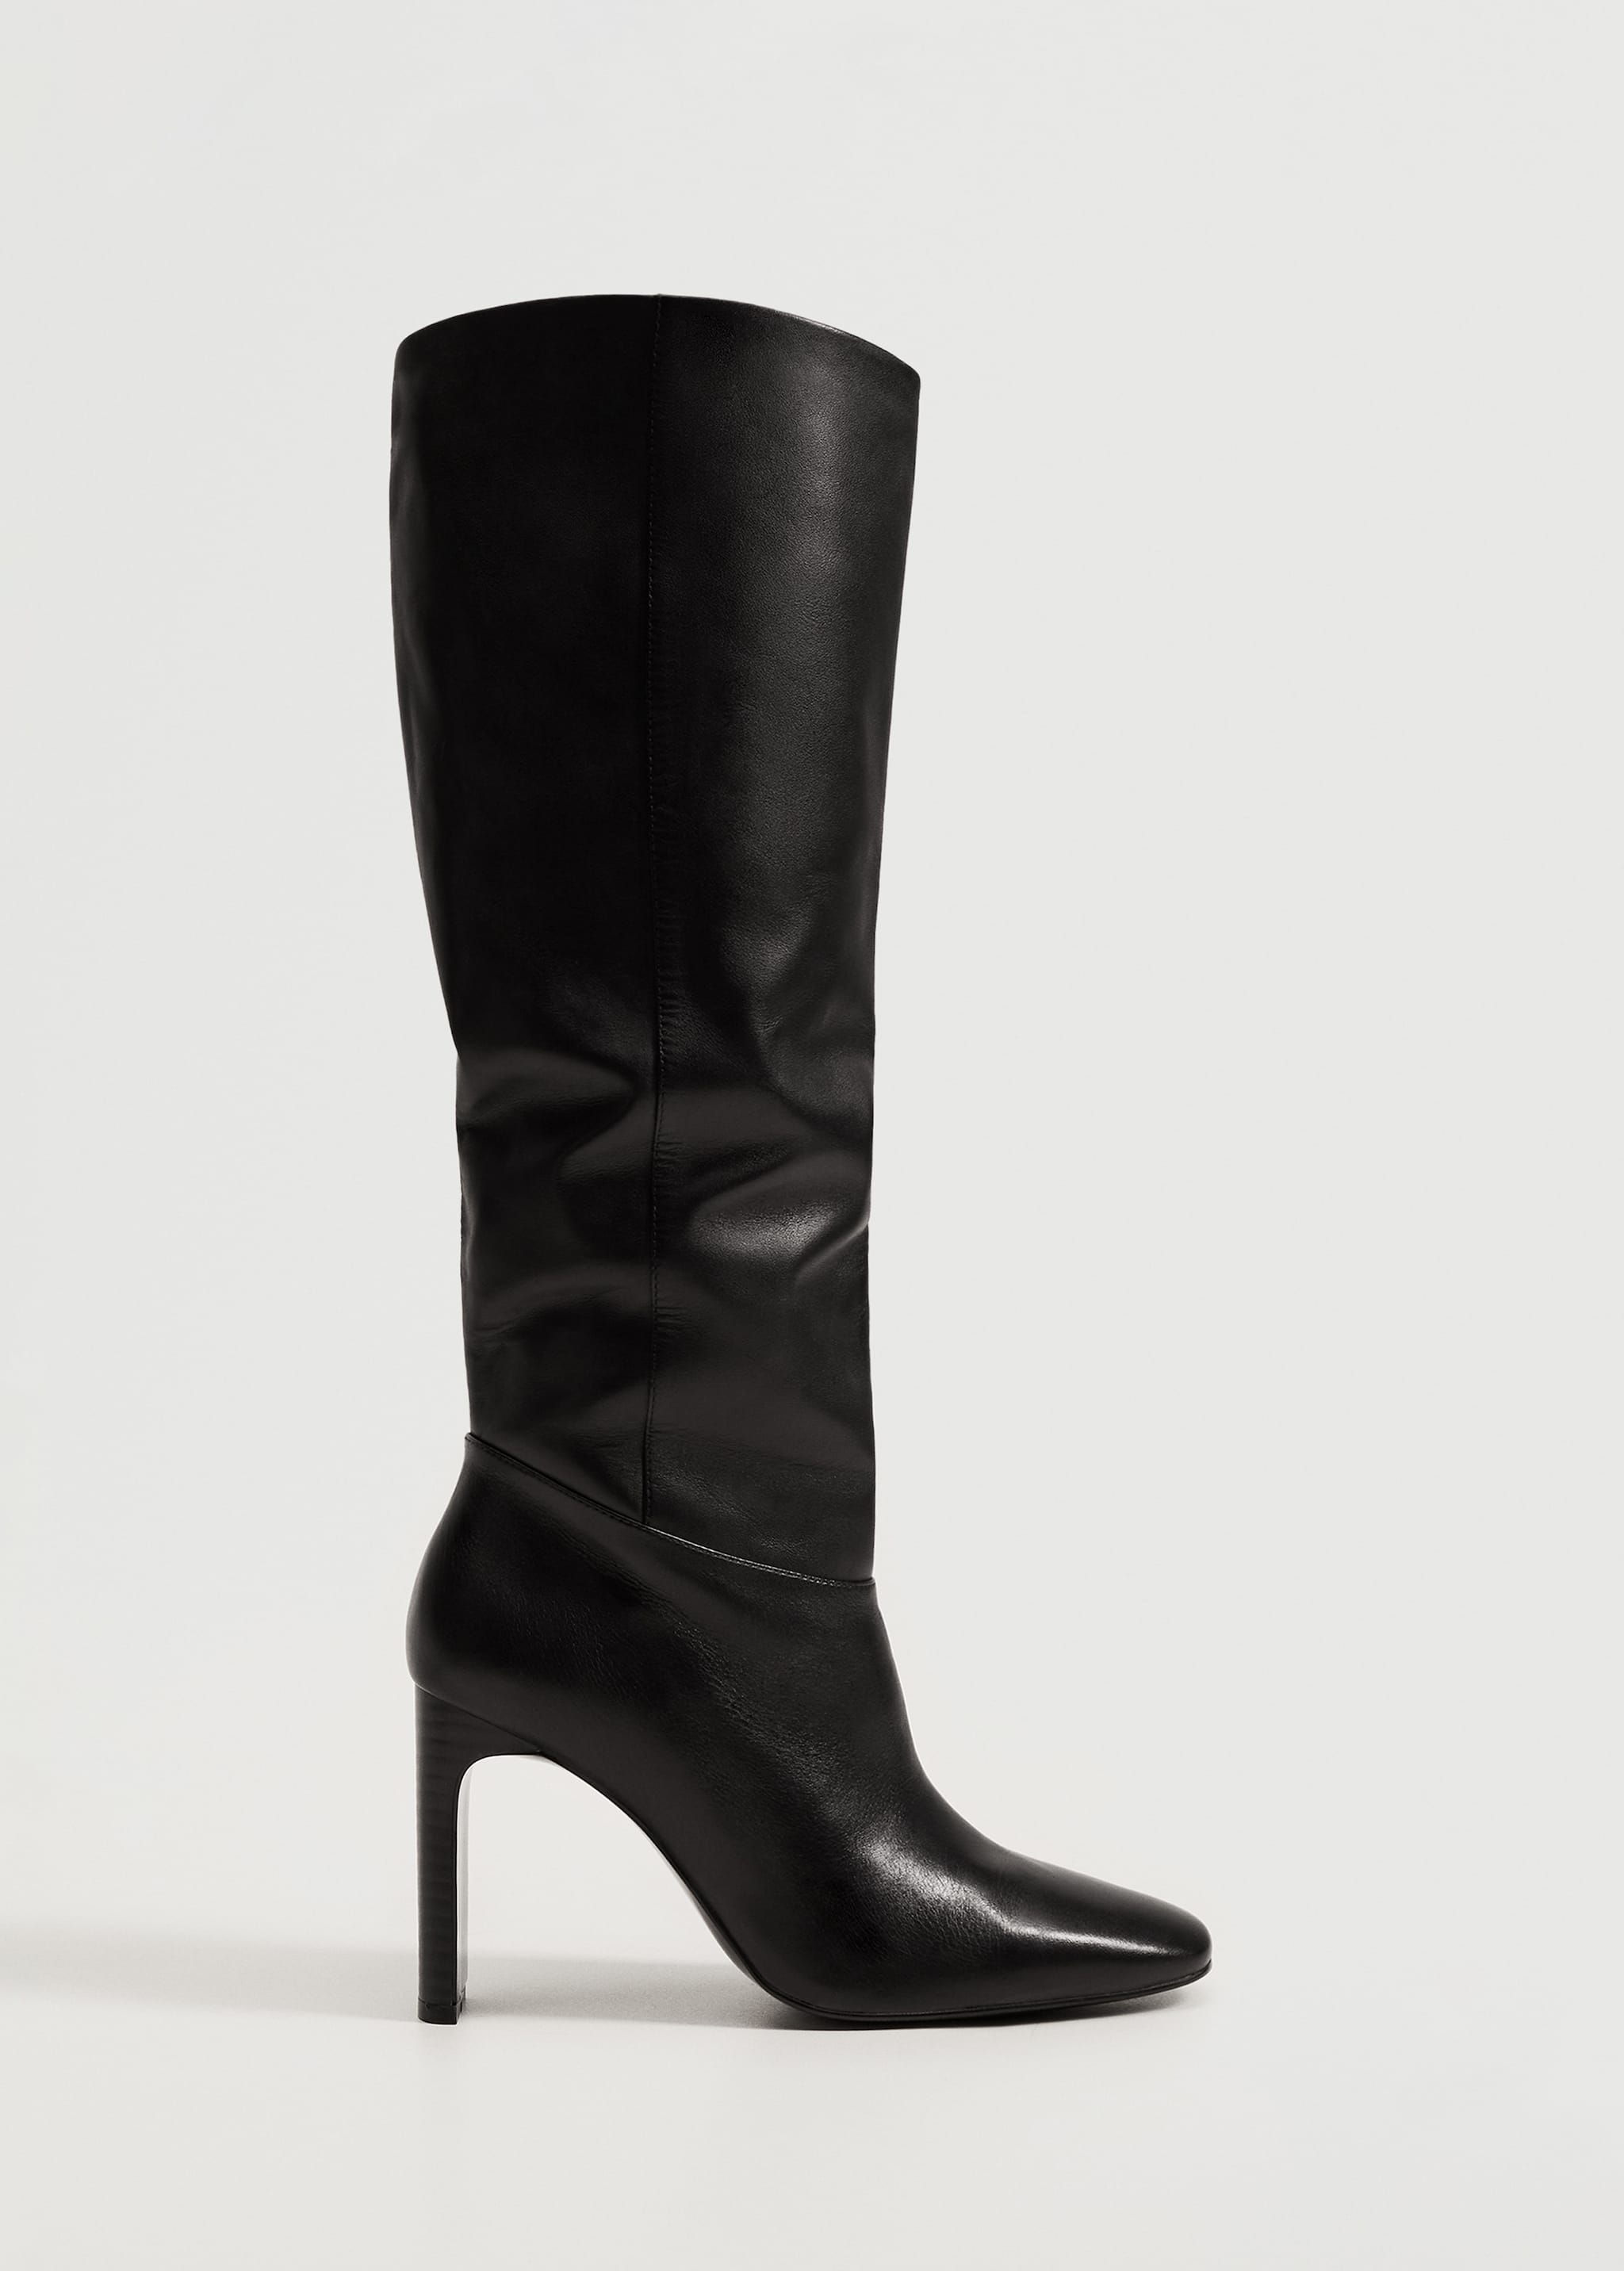 Leather boots with tall leg - Article without model